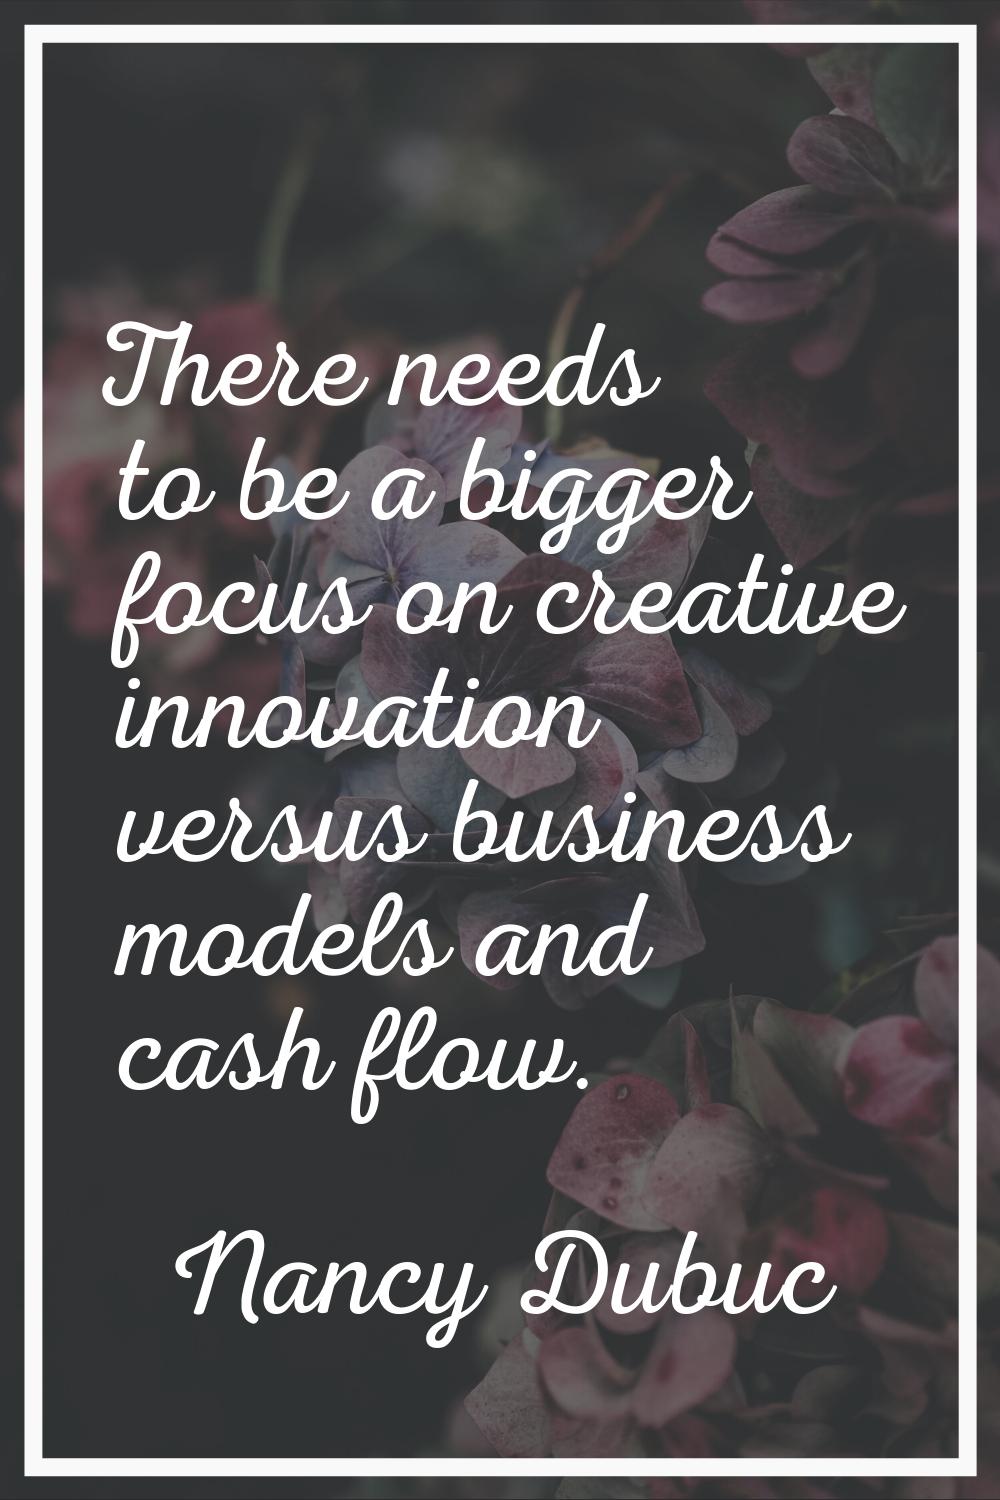 There needs to be a bigger focus on creative innovation versus business models and cash flow.